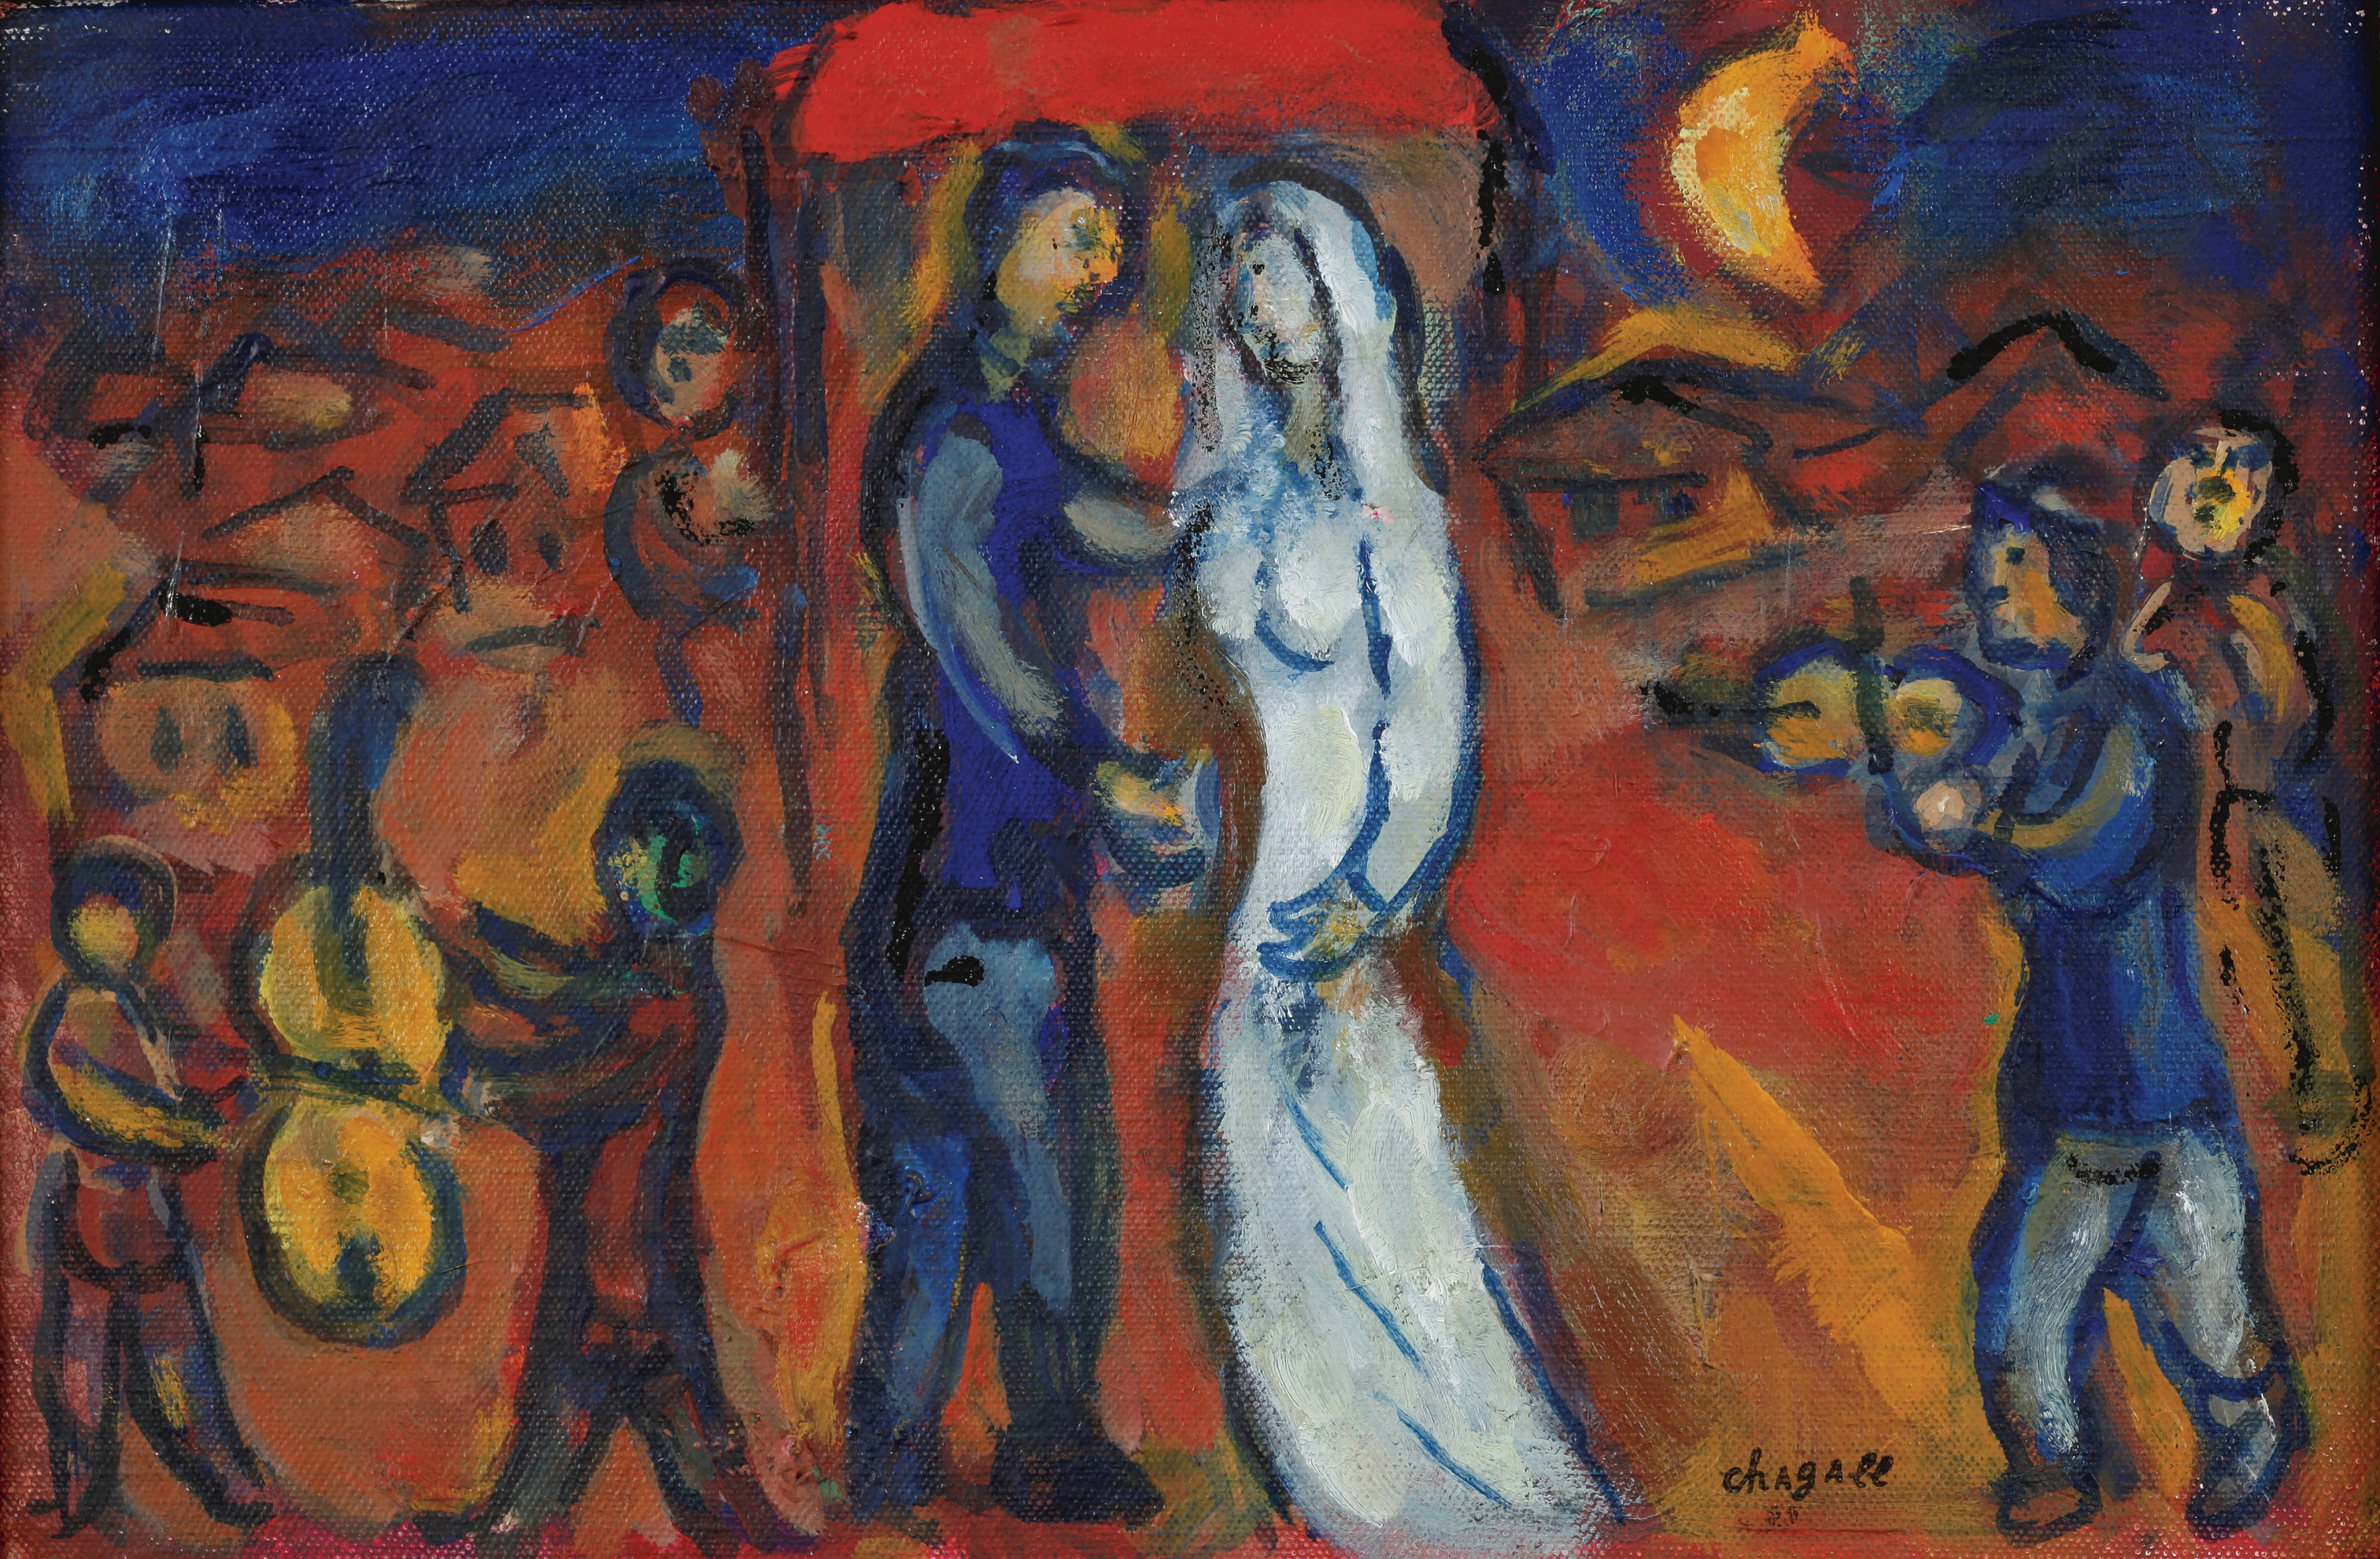 MARC  CHAGALL, THE BRIDE AND THE GROOM UNDER THE CANOPY, 1970-1975